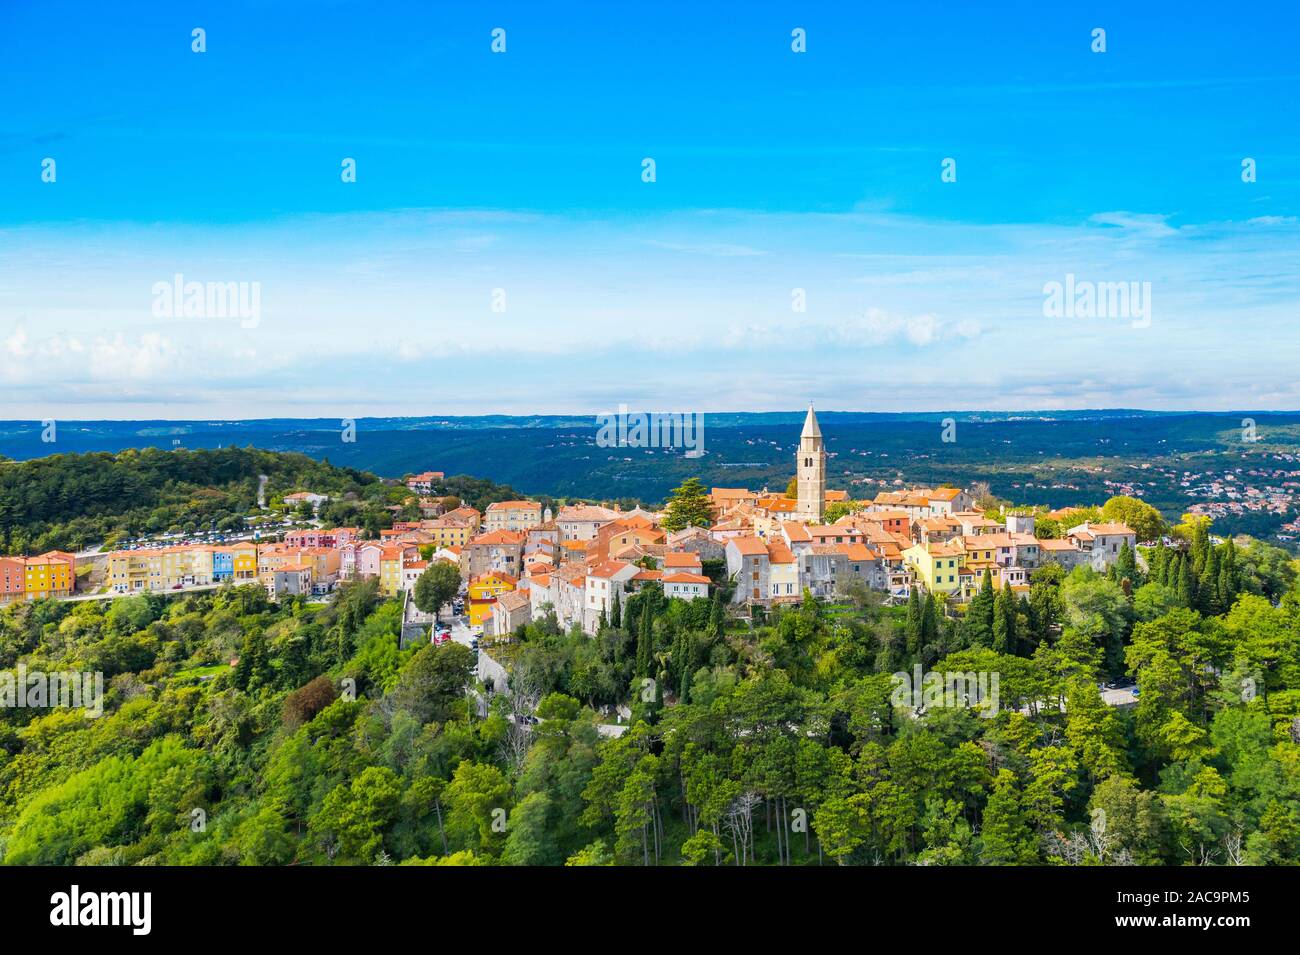 Town of Labin in Istria, Croatia, old traditional houses and castle, view from drone Stock Photo